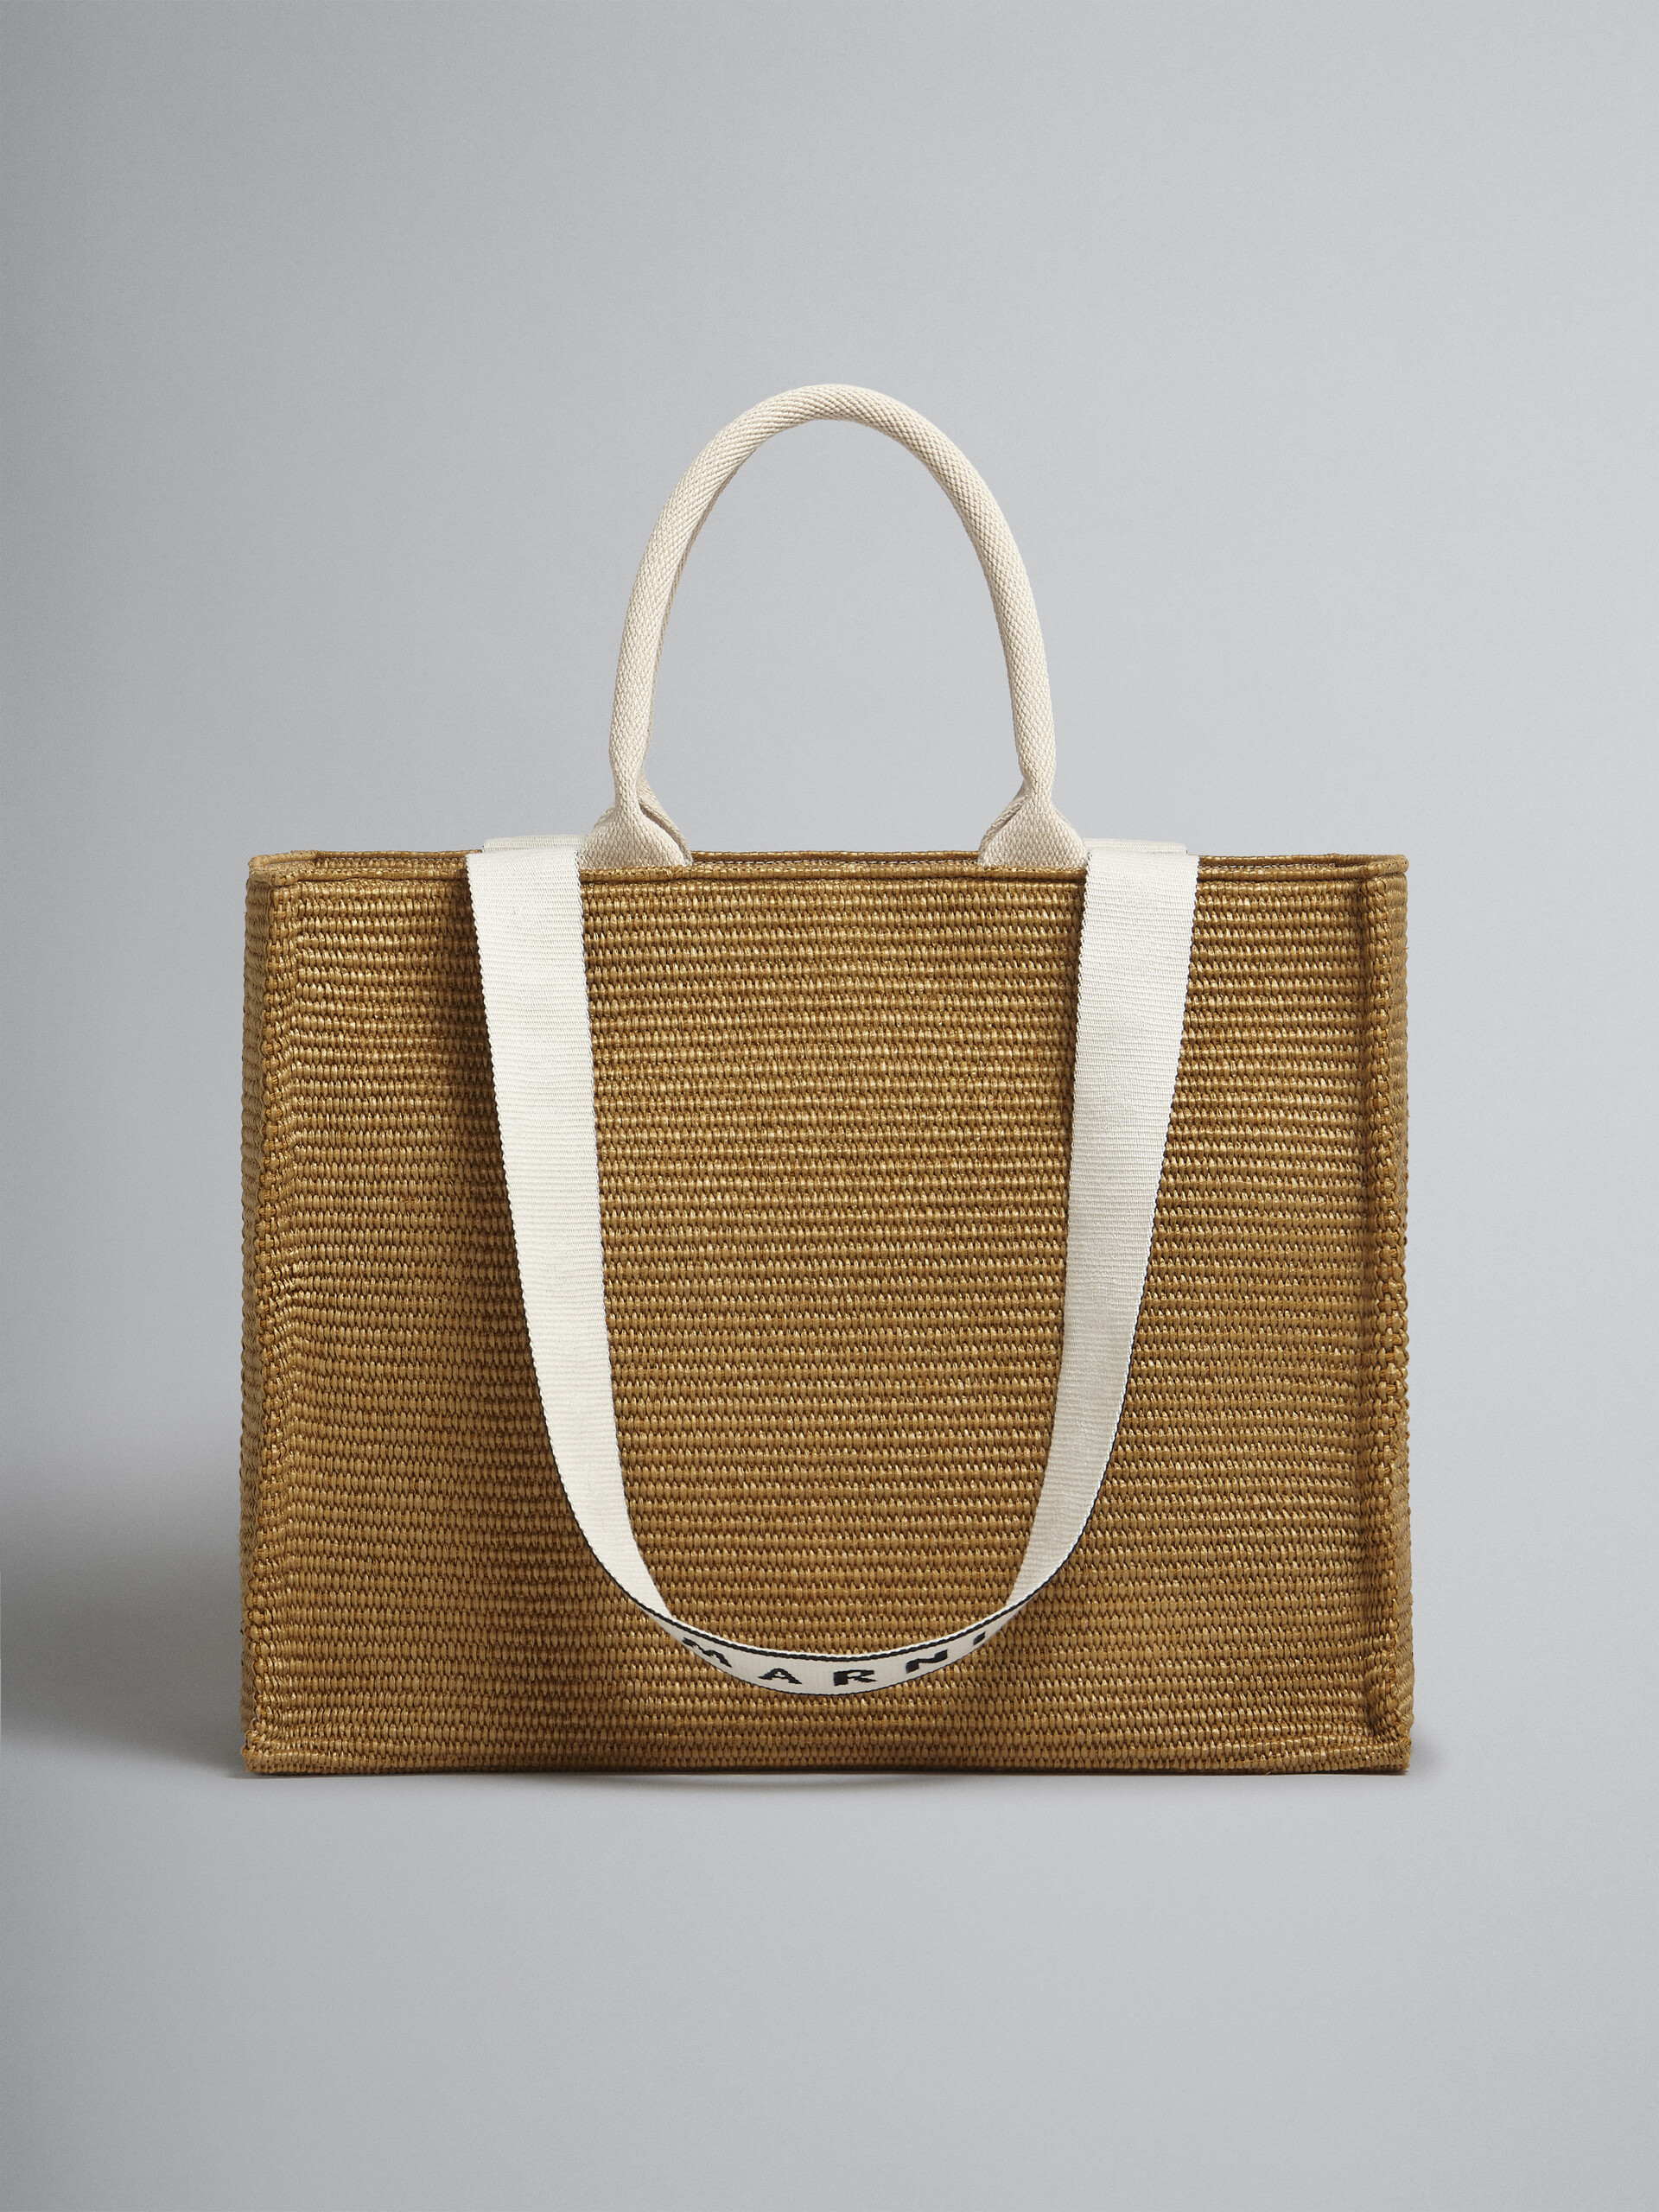 Bey tote Bag in brown raffia - Shopping Bags - Image 1